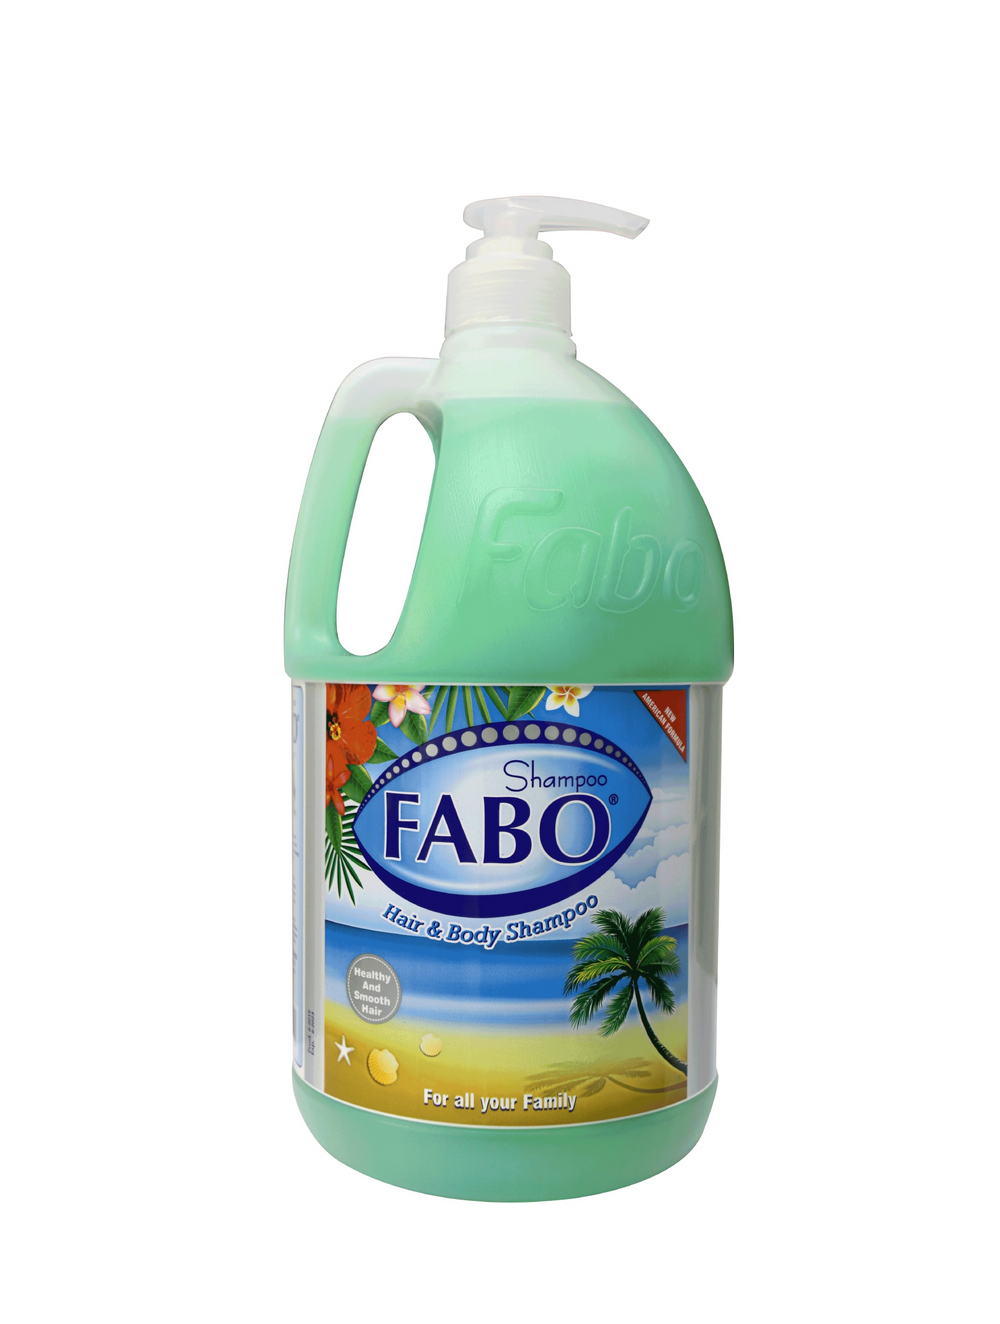 fabo-products_page-0098